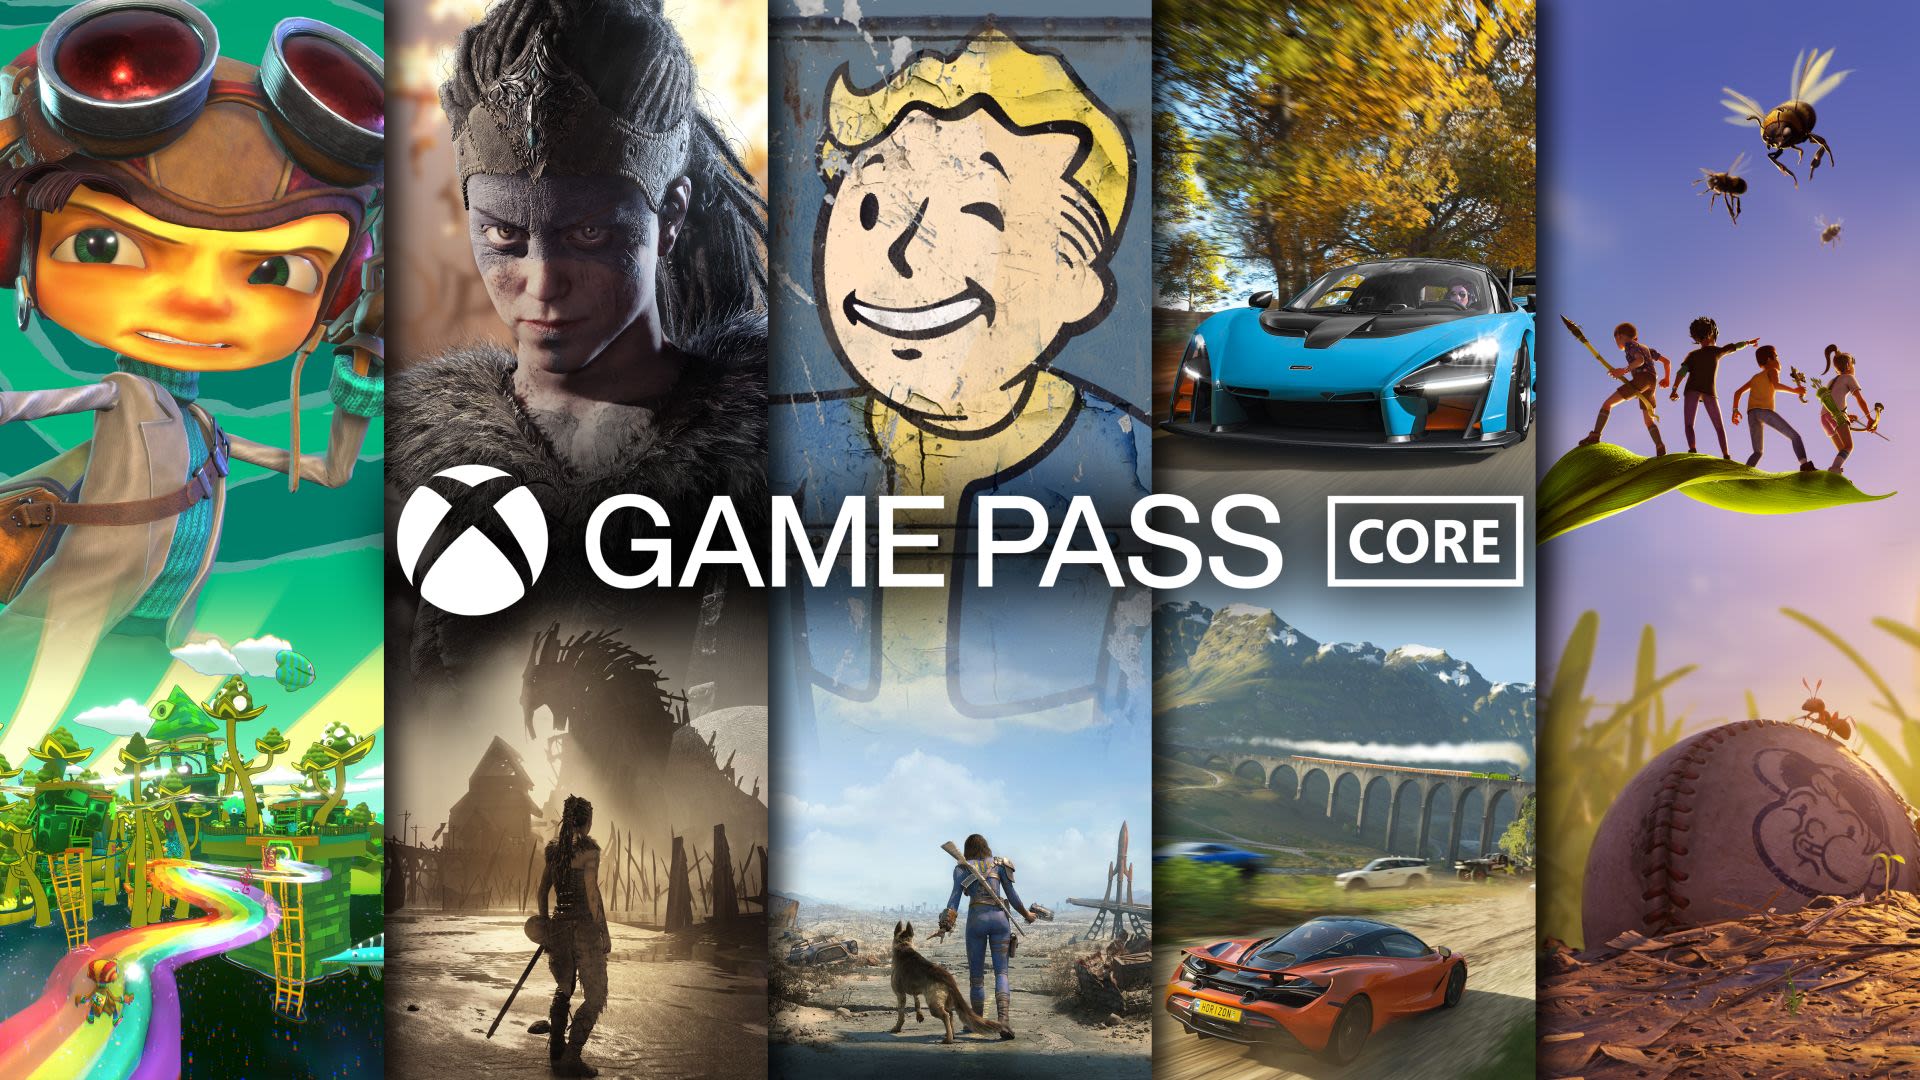 Xbox Game Pass Subscribers Can Now Play 5 New Games